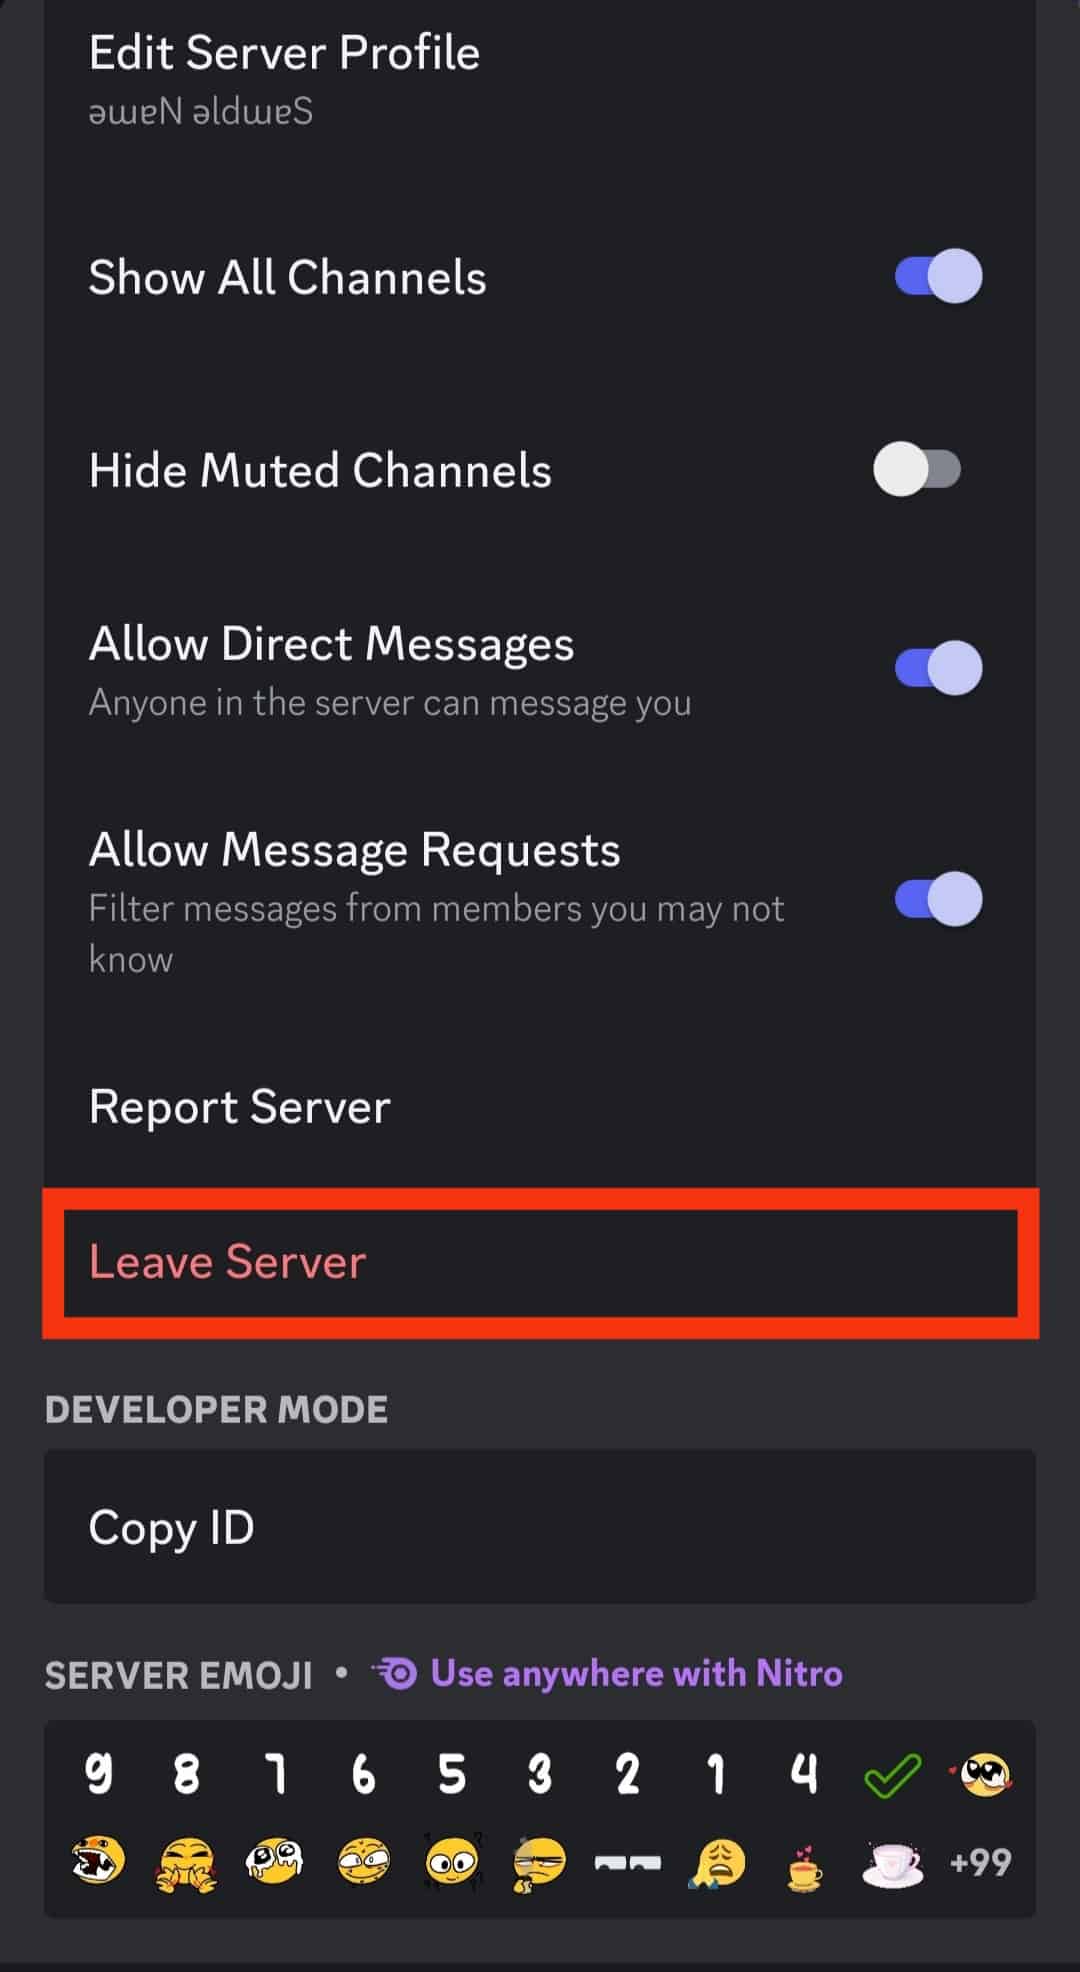 Tap On The Leave Sever Option